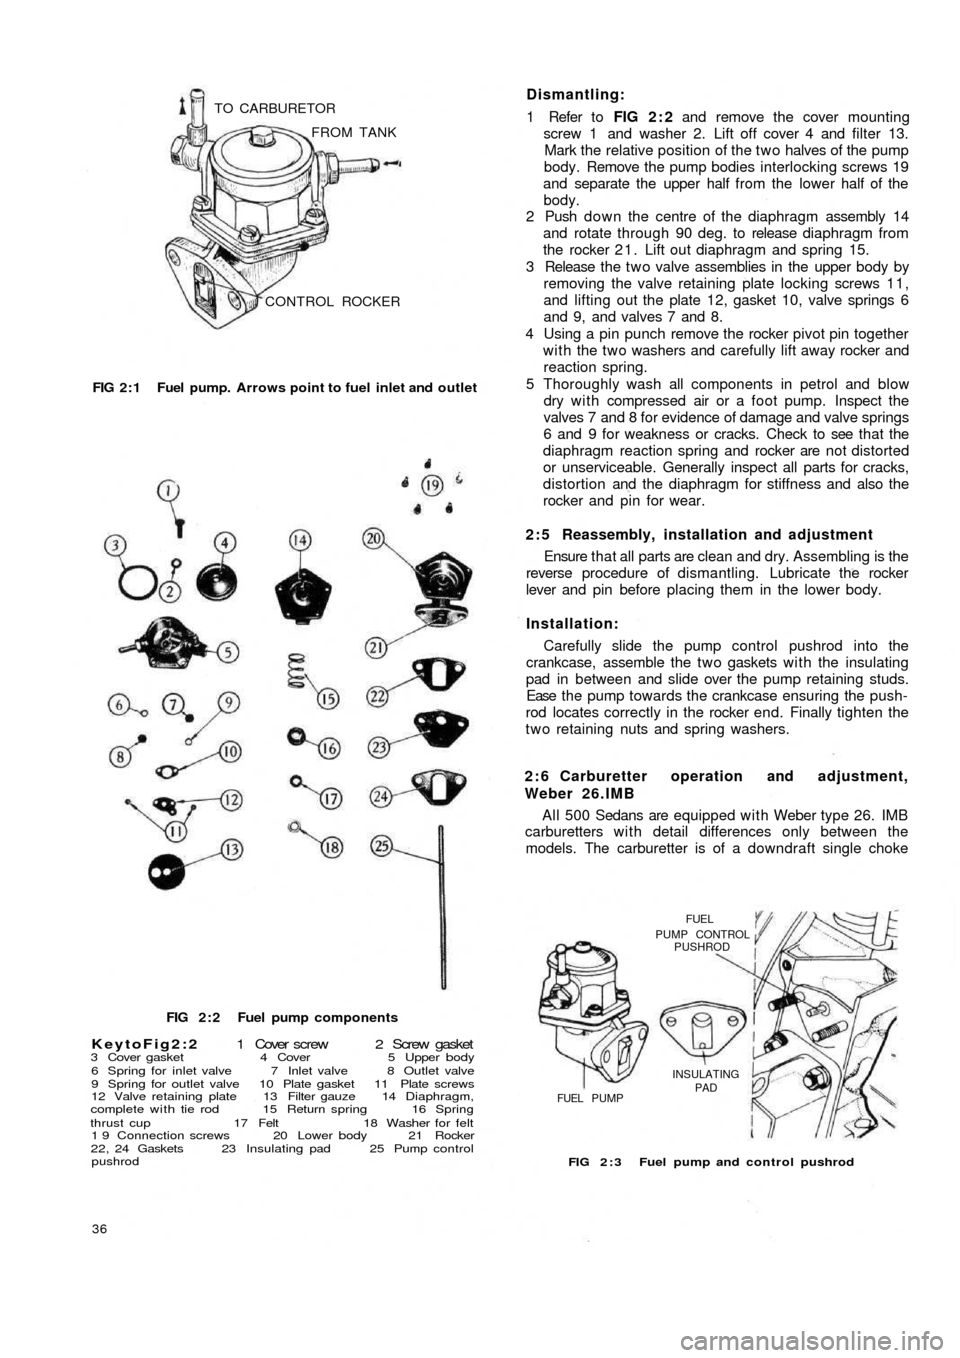 FIAT 500 1969 1.G Owners Manual CONTROL ROCKER FROM TANK TO CARBURETOR
FIG 2 : 1  Fuel pump. Arrows point to fuel  inlet and outlet
FIG 2 : 2  Fuel pump components
KeytoFig2:2 1  Cover  screw  2  Screw  gasket3 Cover gasket 4 Cover 